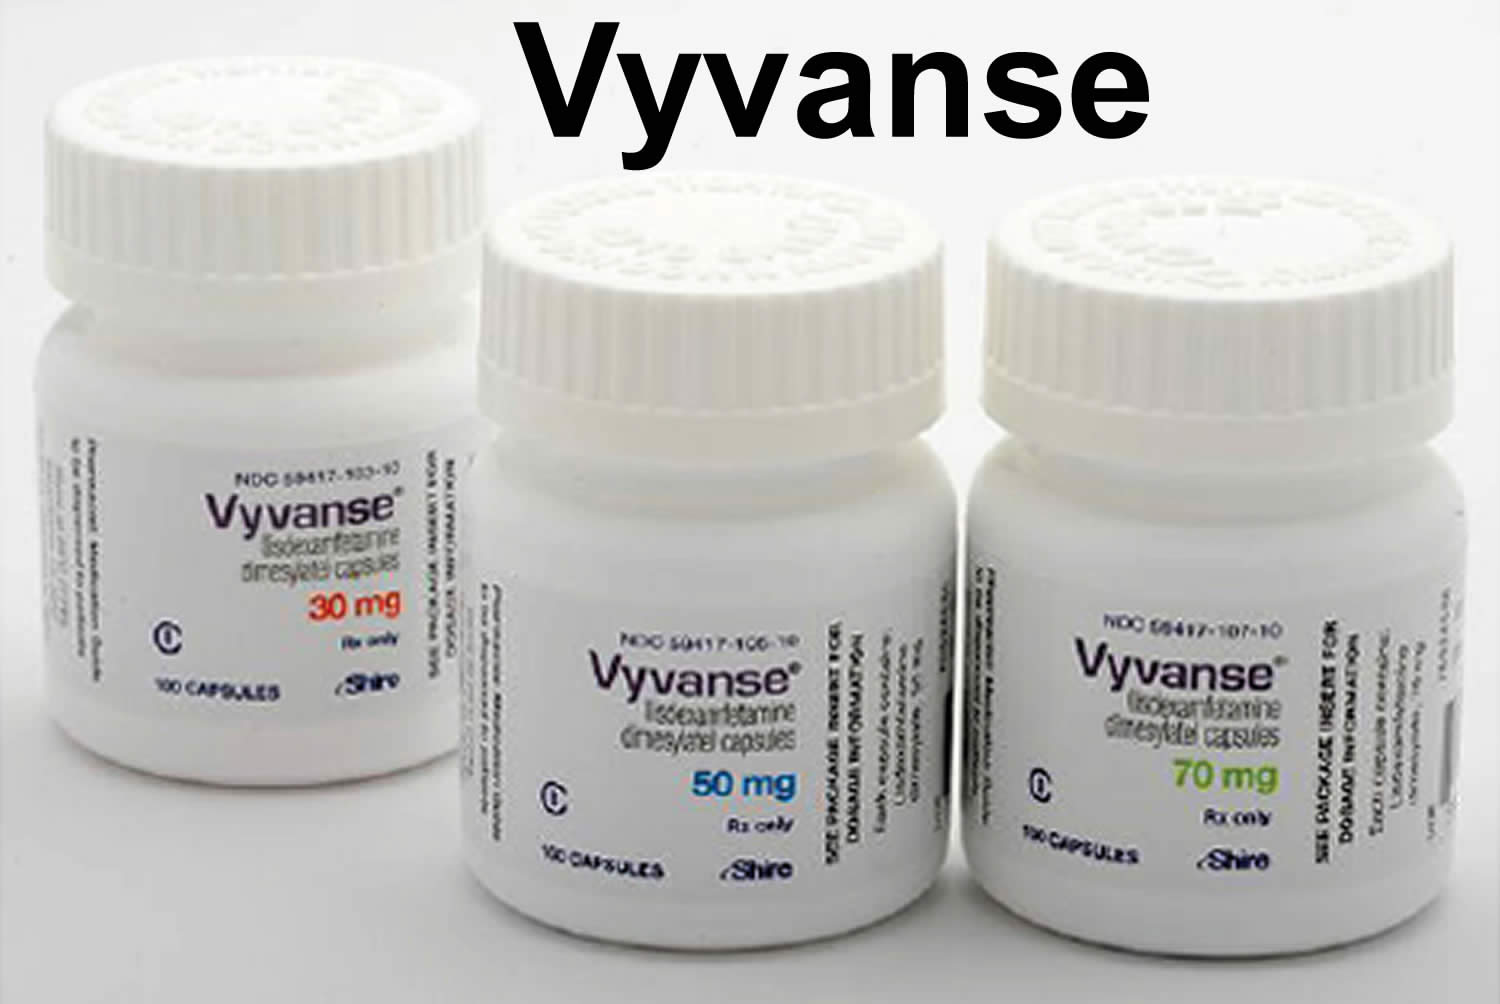 Vyvanse Uses For ADHD Binge Eating Vyvanse Dosage And Side Effects